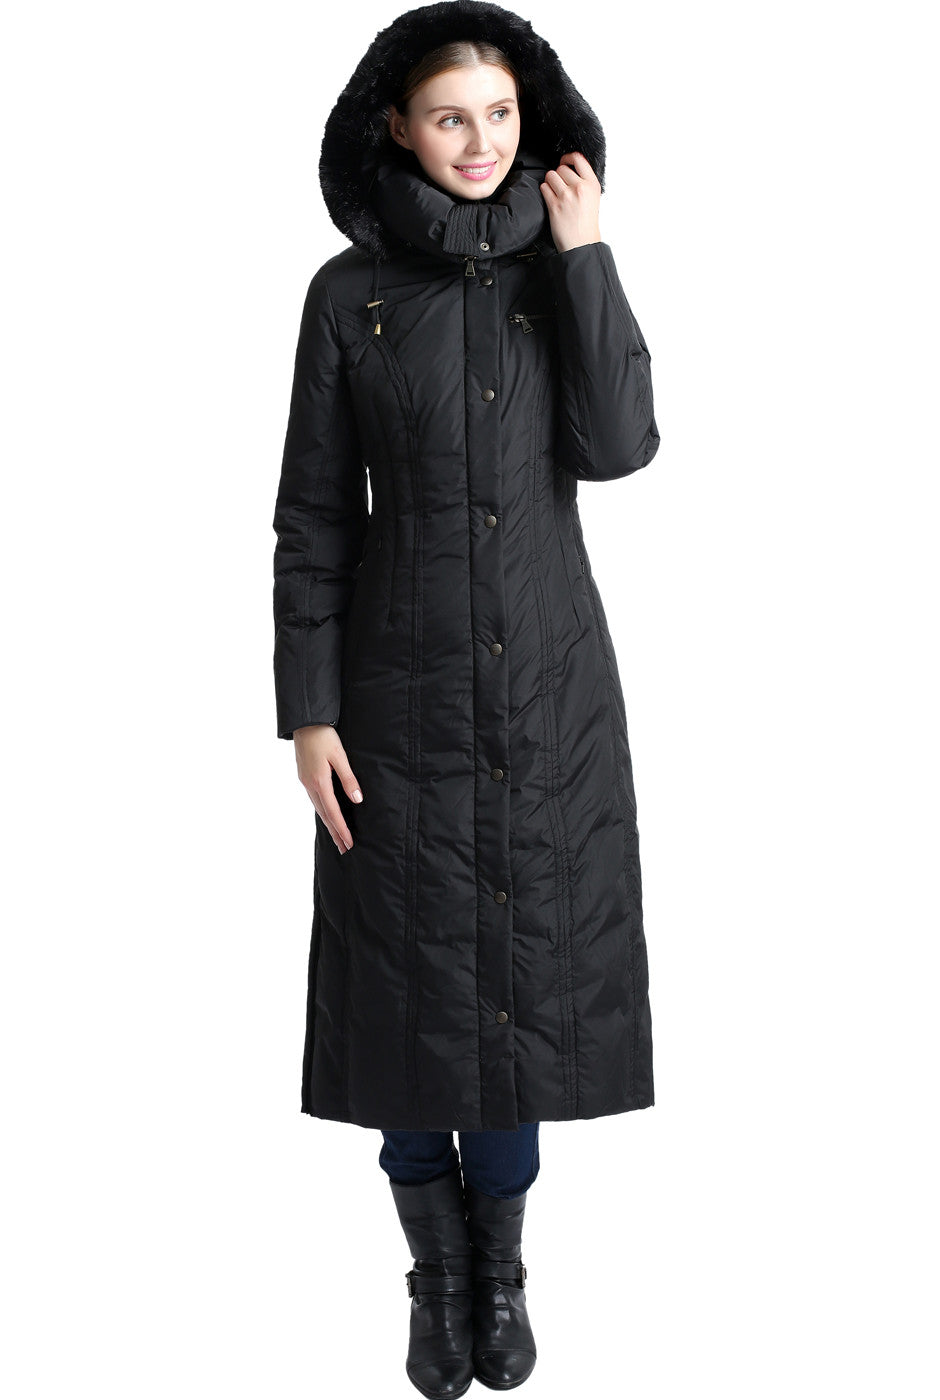 bgsd womens lacey water resistant hooded long down puffer coat